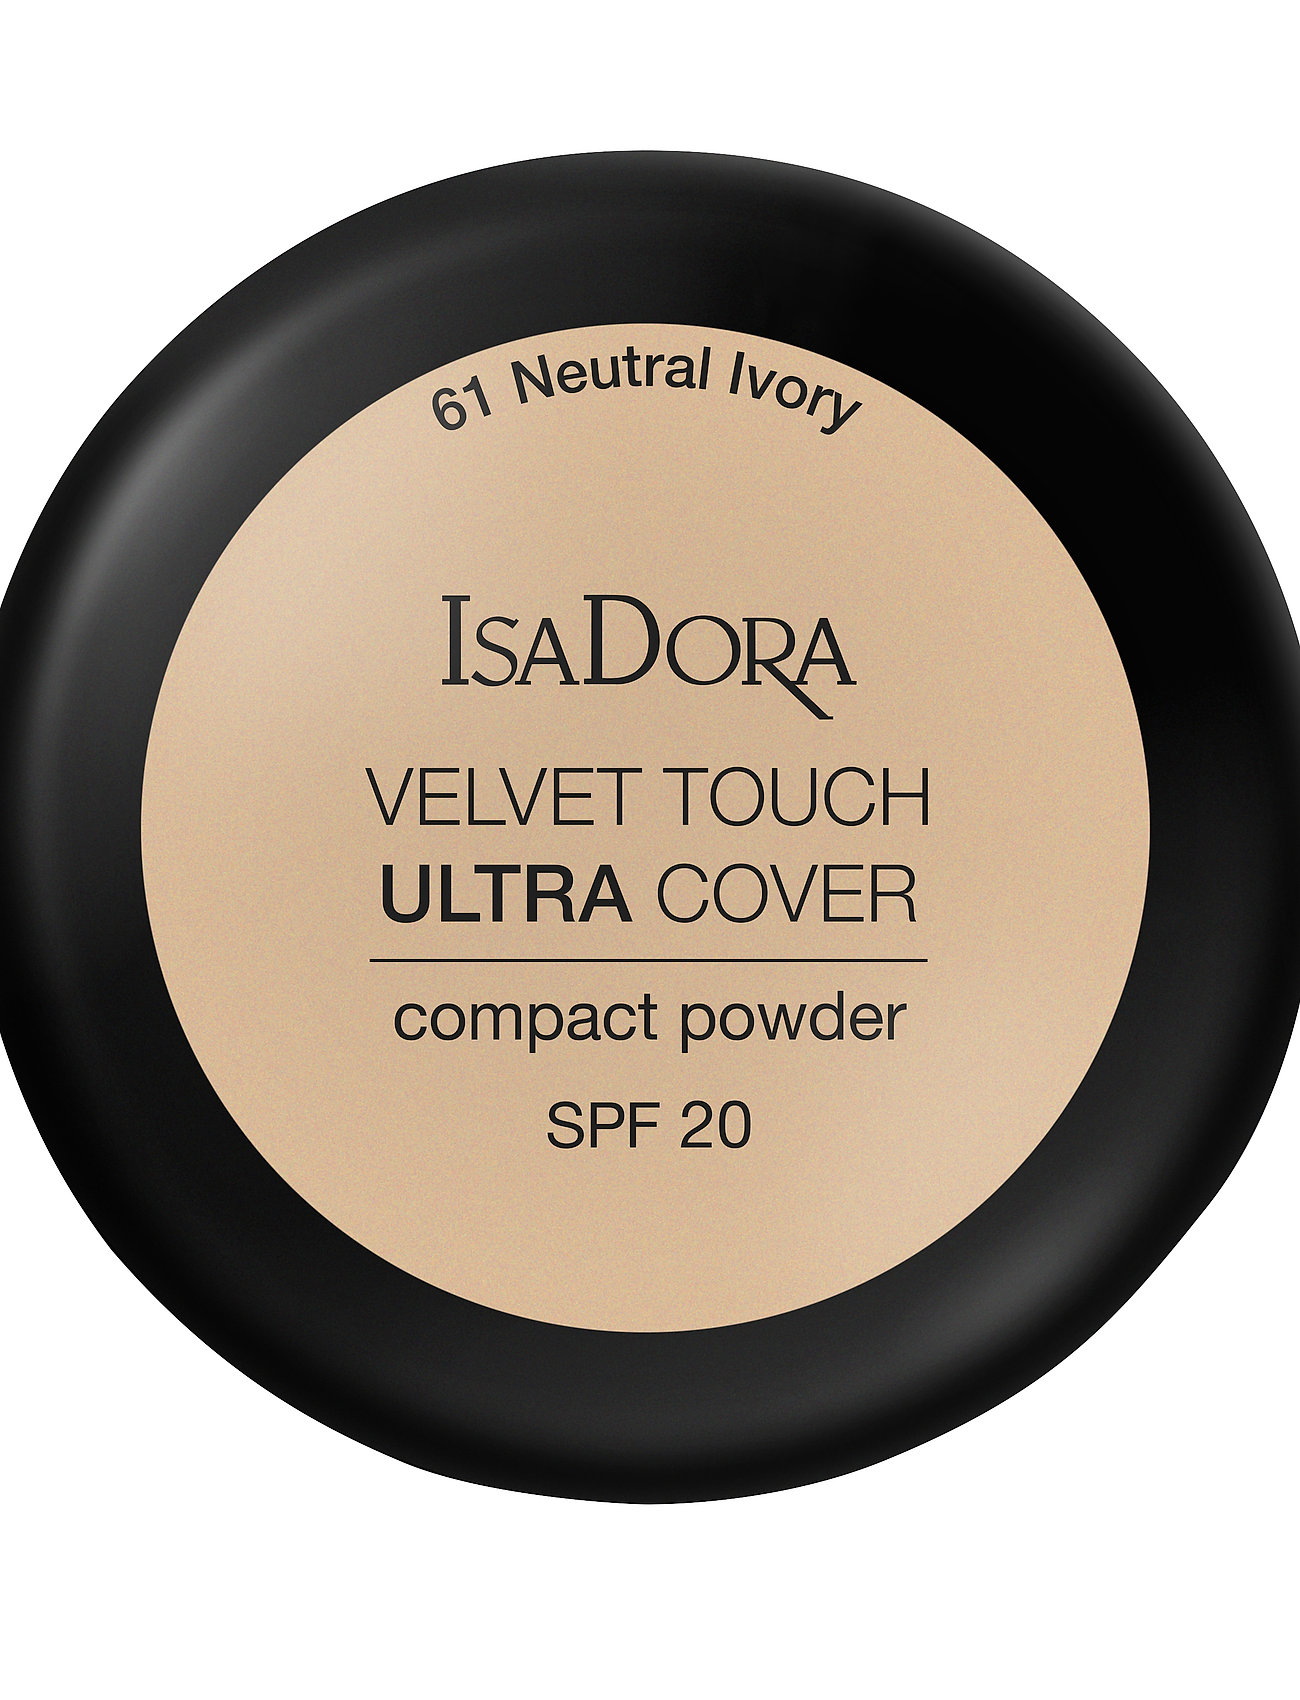 IsaDora - Velvet Touch Ultra Cover Compact Powder SPF 20 - pudder - neutral ivory - 1